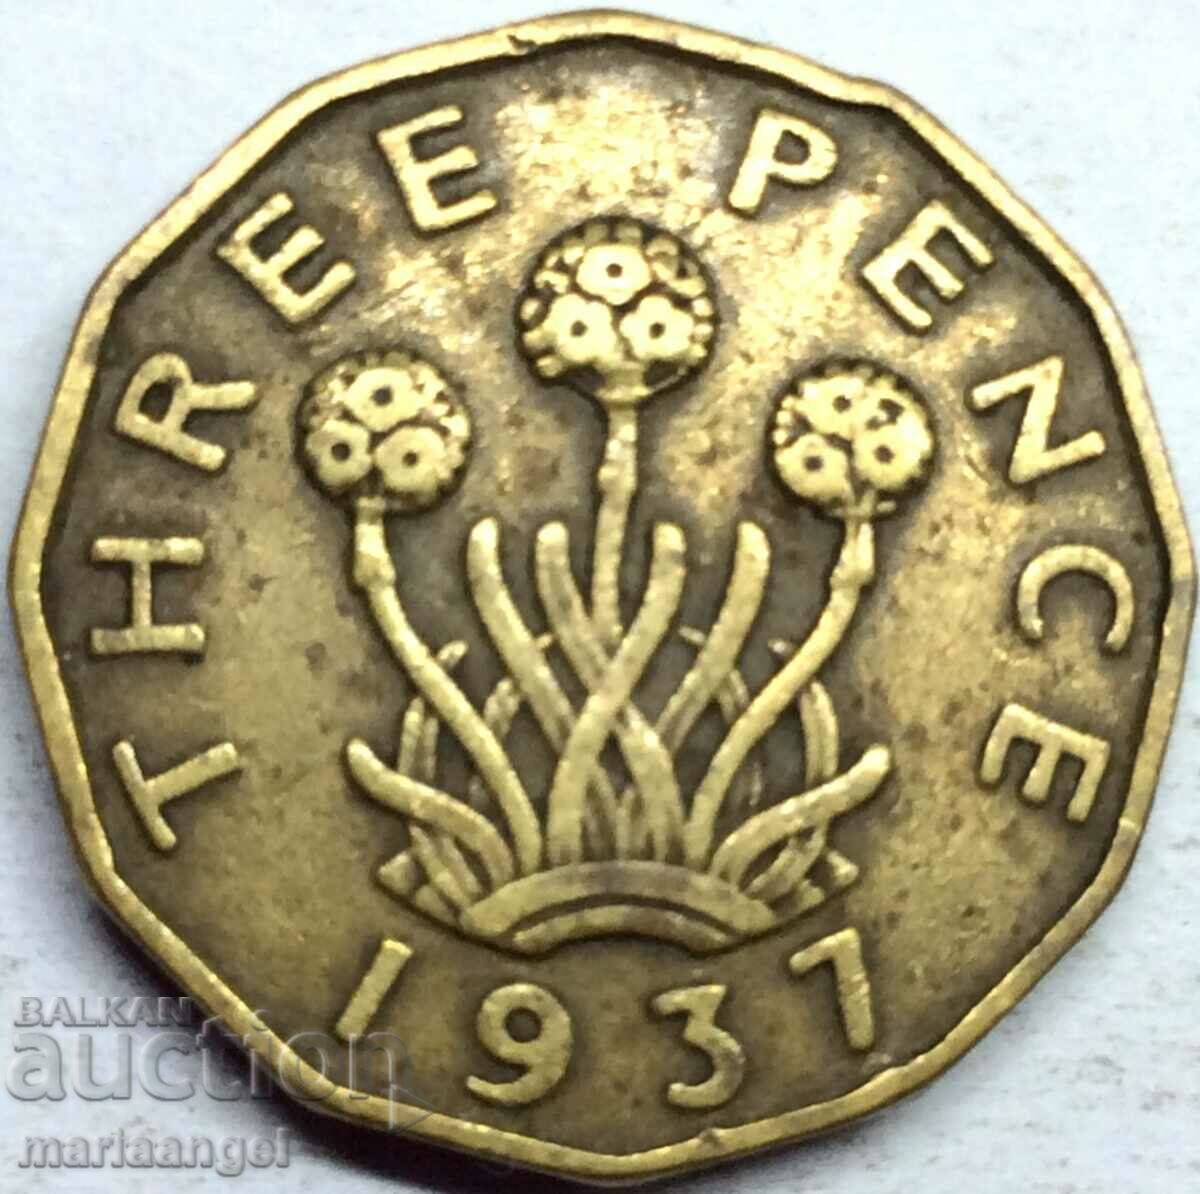 Great Britain 3 pence 1937 Georg brass